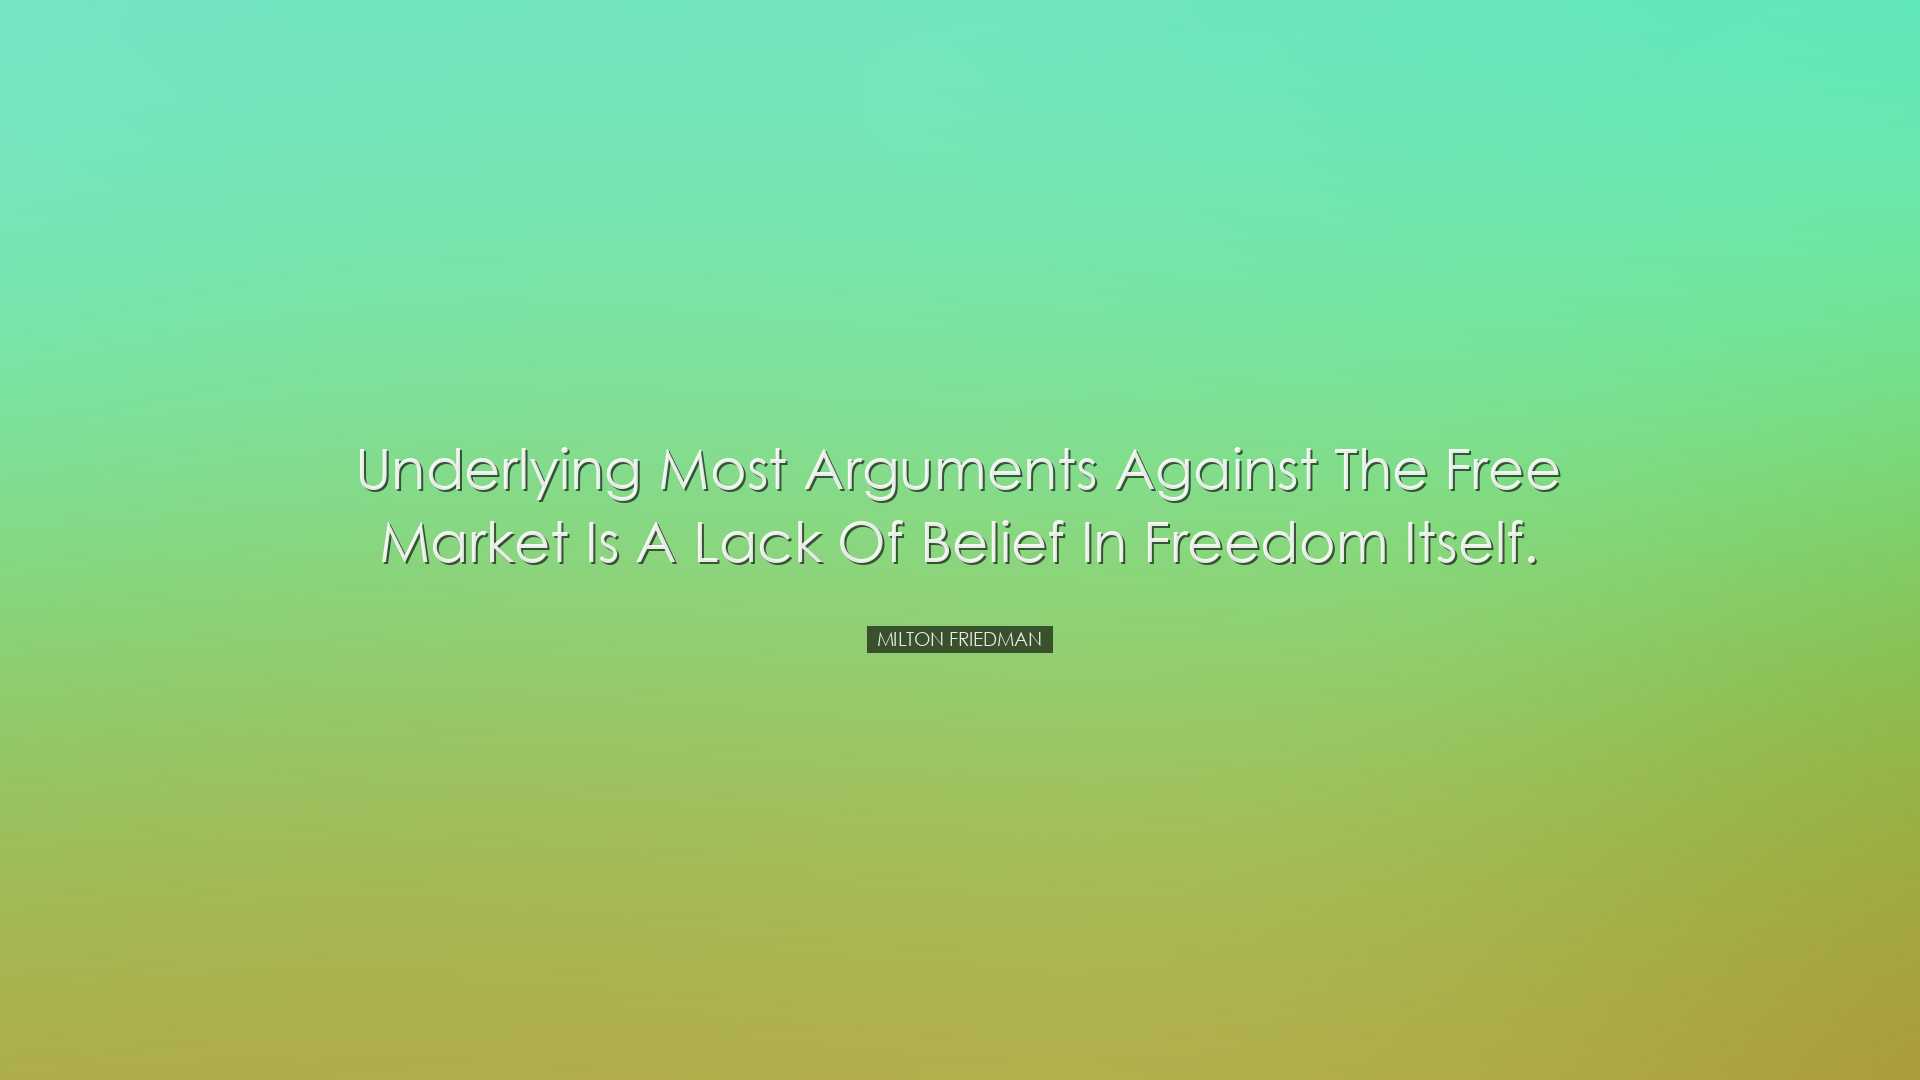 Underlying most arguments against the free market is a lack of bel